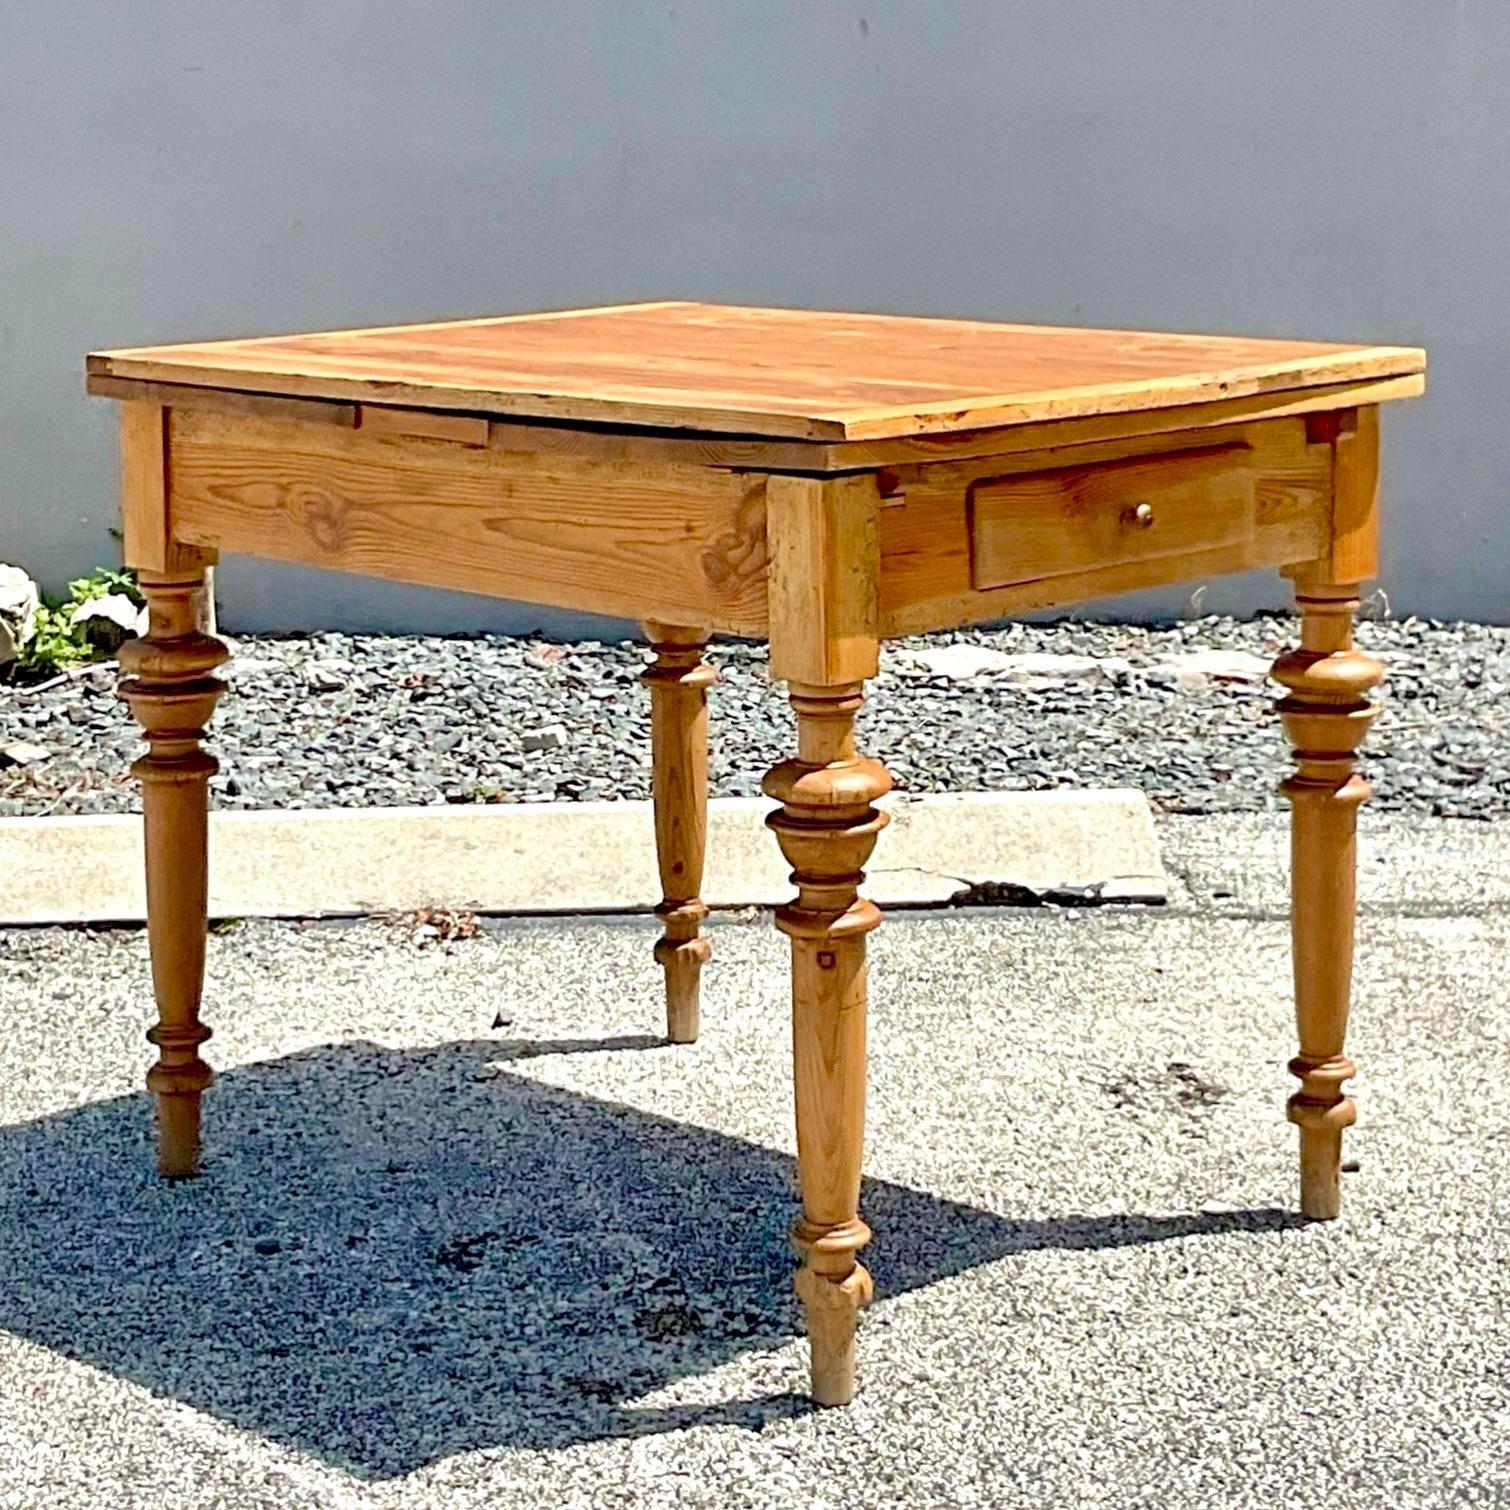 A fabulous vintage Boho dining table. A chic rustic pine construction with hand turned legs. A patinated top with an authentic look. Two concealed leaves pull out for an extended surface. Perfect as a small table, desk or a kitchen island and then